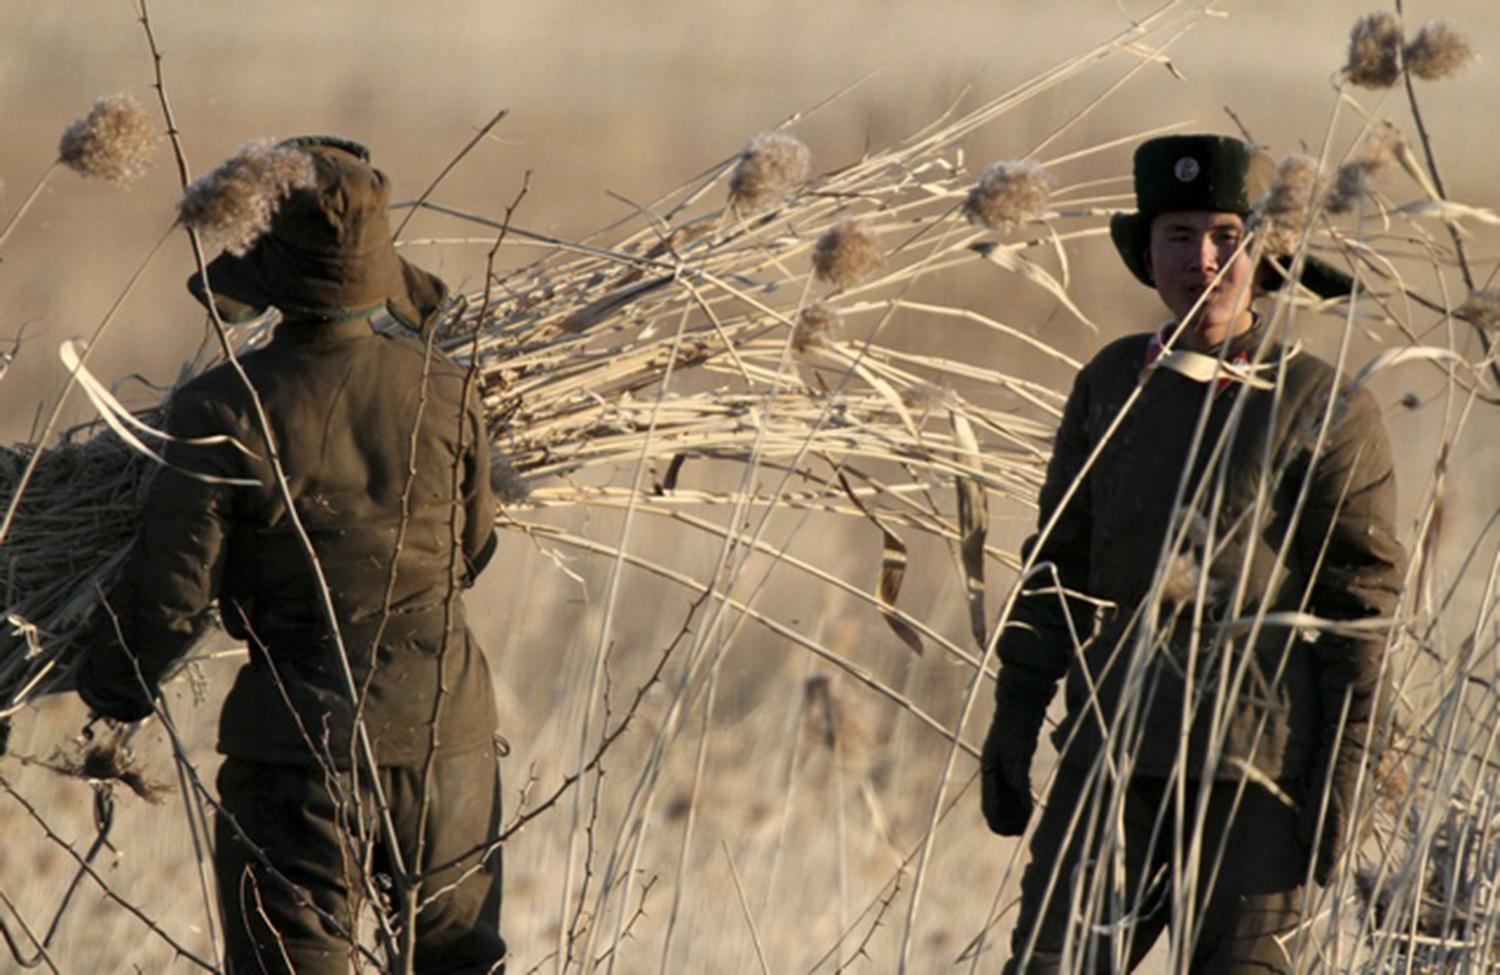 Soldiers collect straw on Hwanggumpyong Island, near the North Korean town of Sinuiju on January 6, 2016. ©2016 Reuters